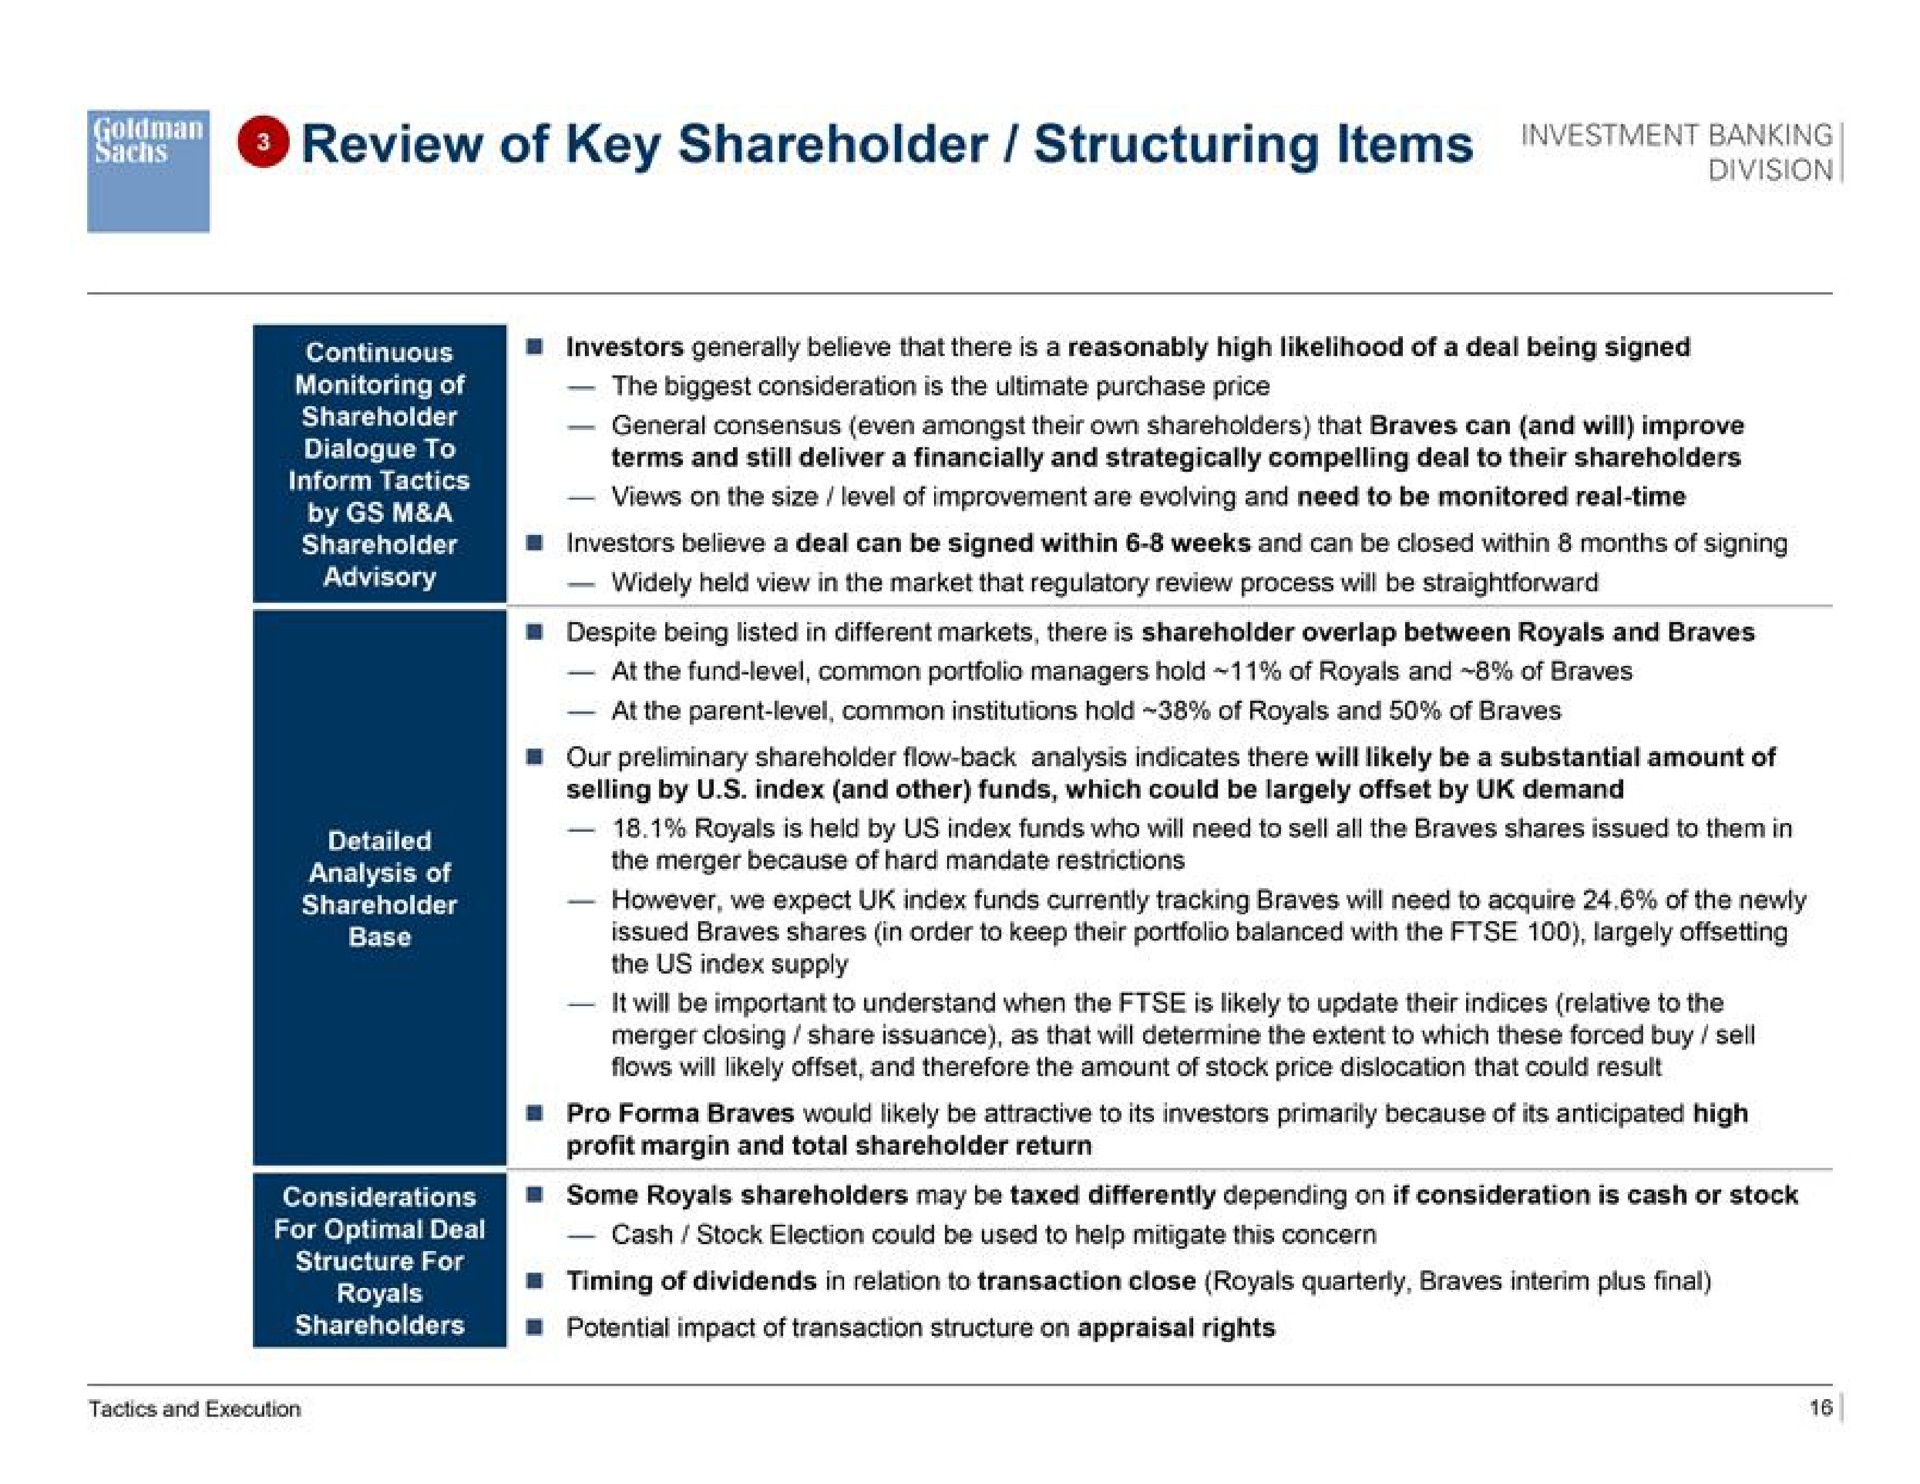 review of key shareholder structuring items | Goldman Sachs